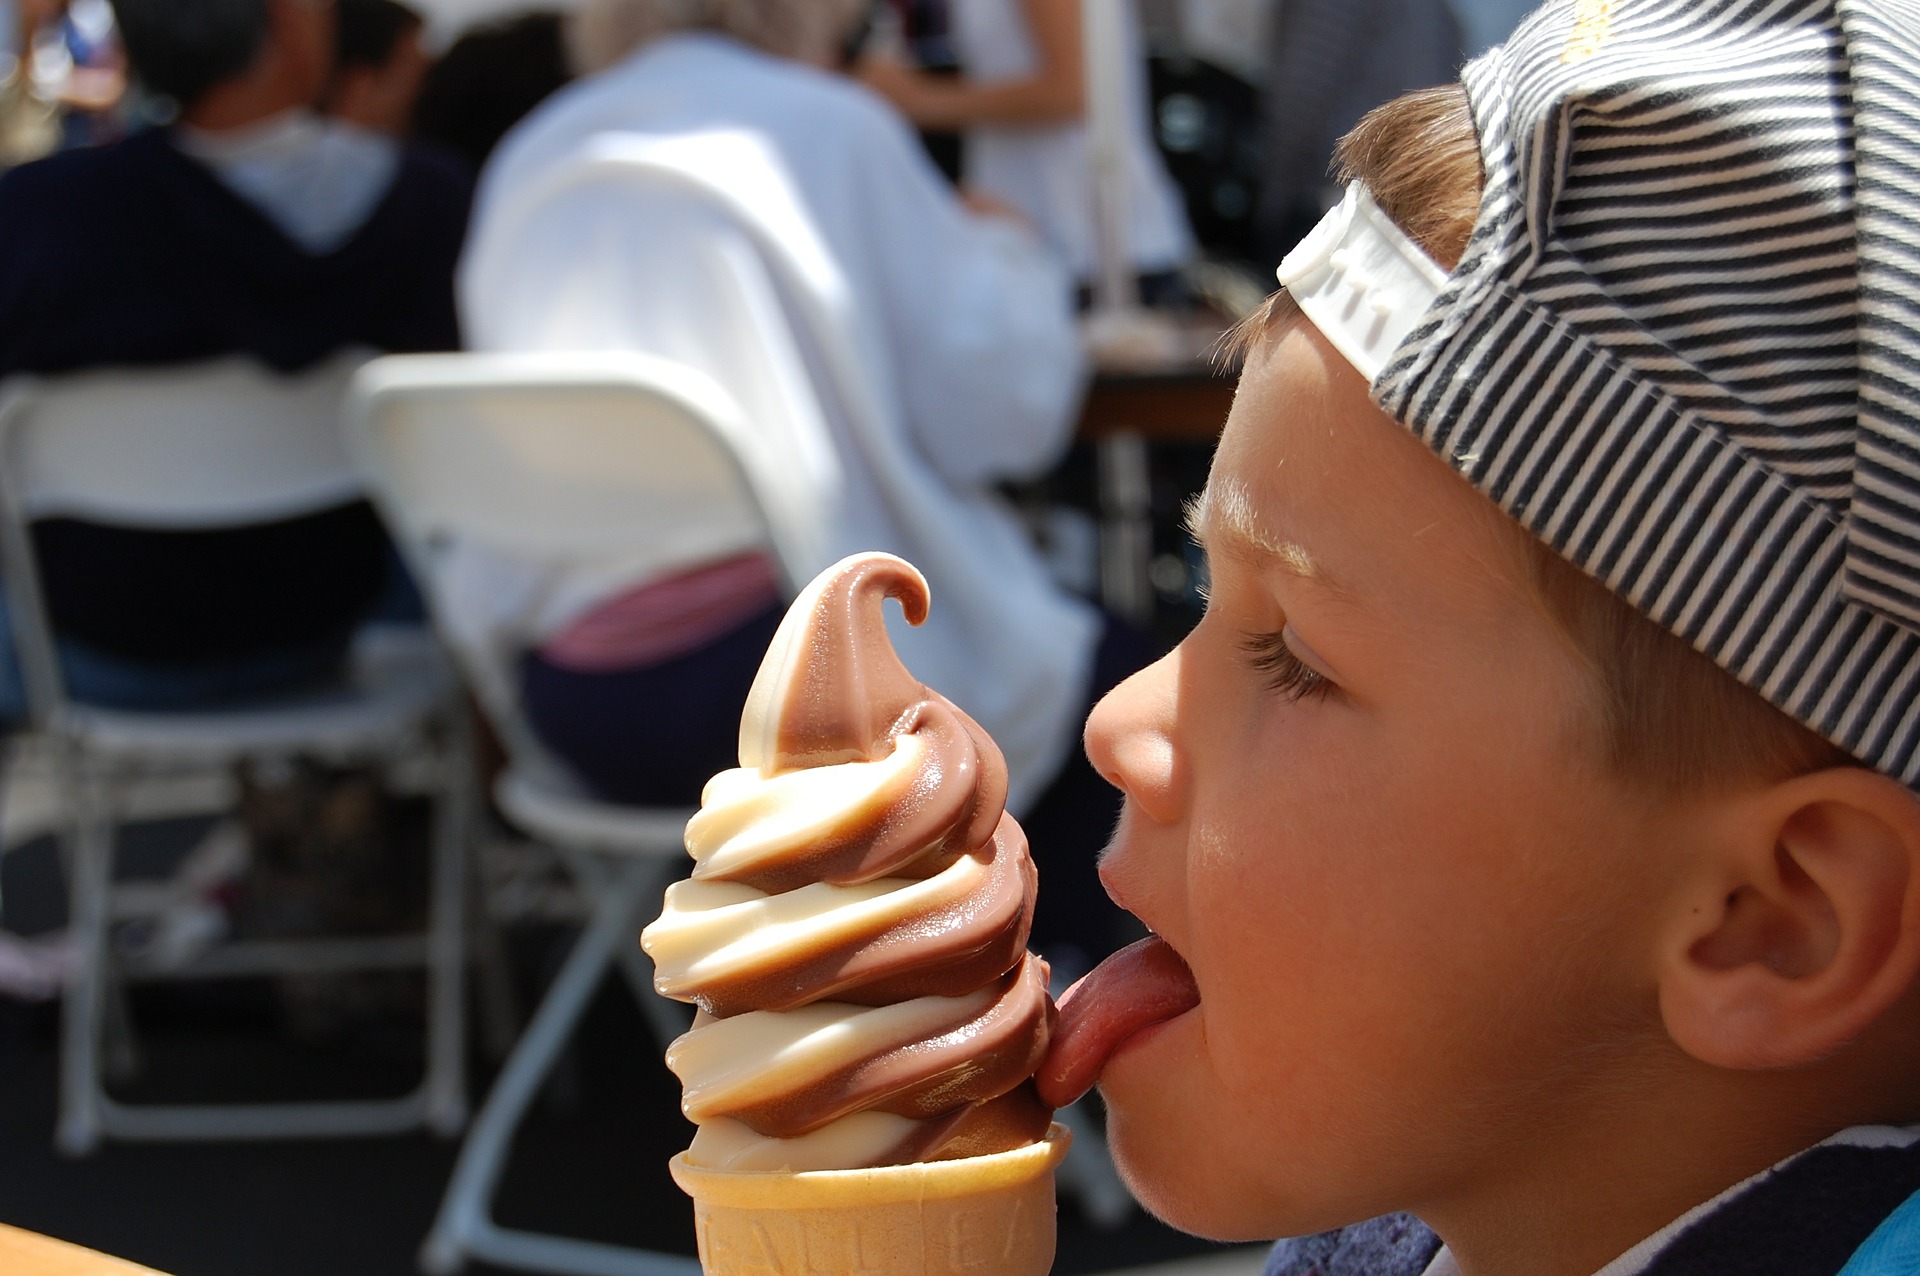 Boy with stripes cap licked the ice cream